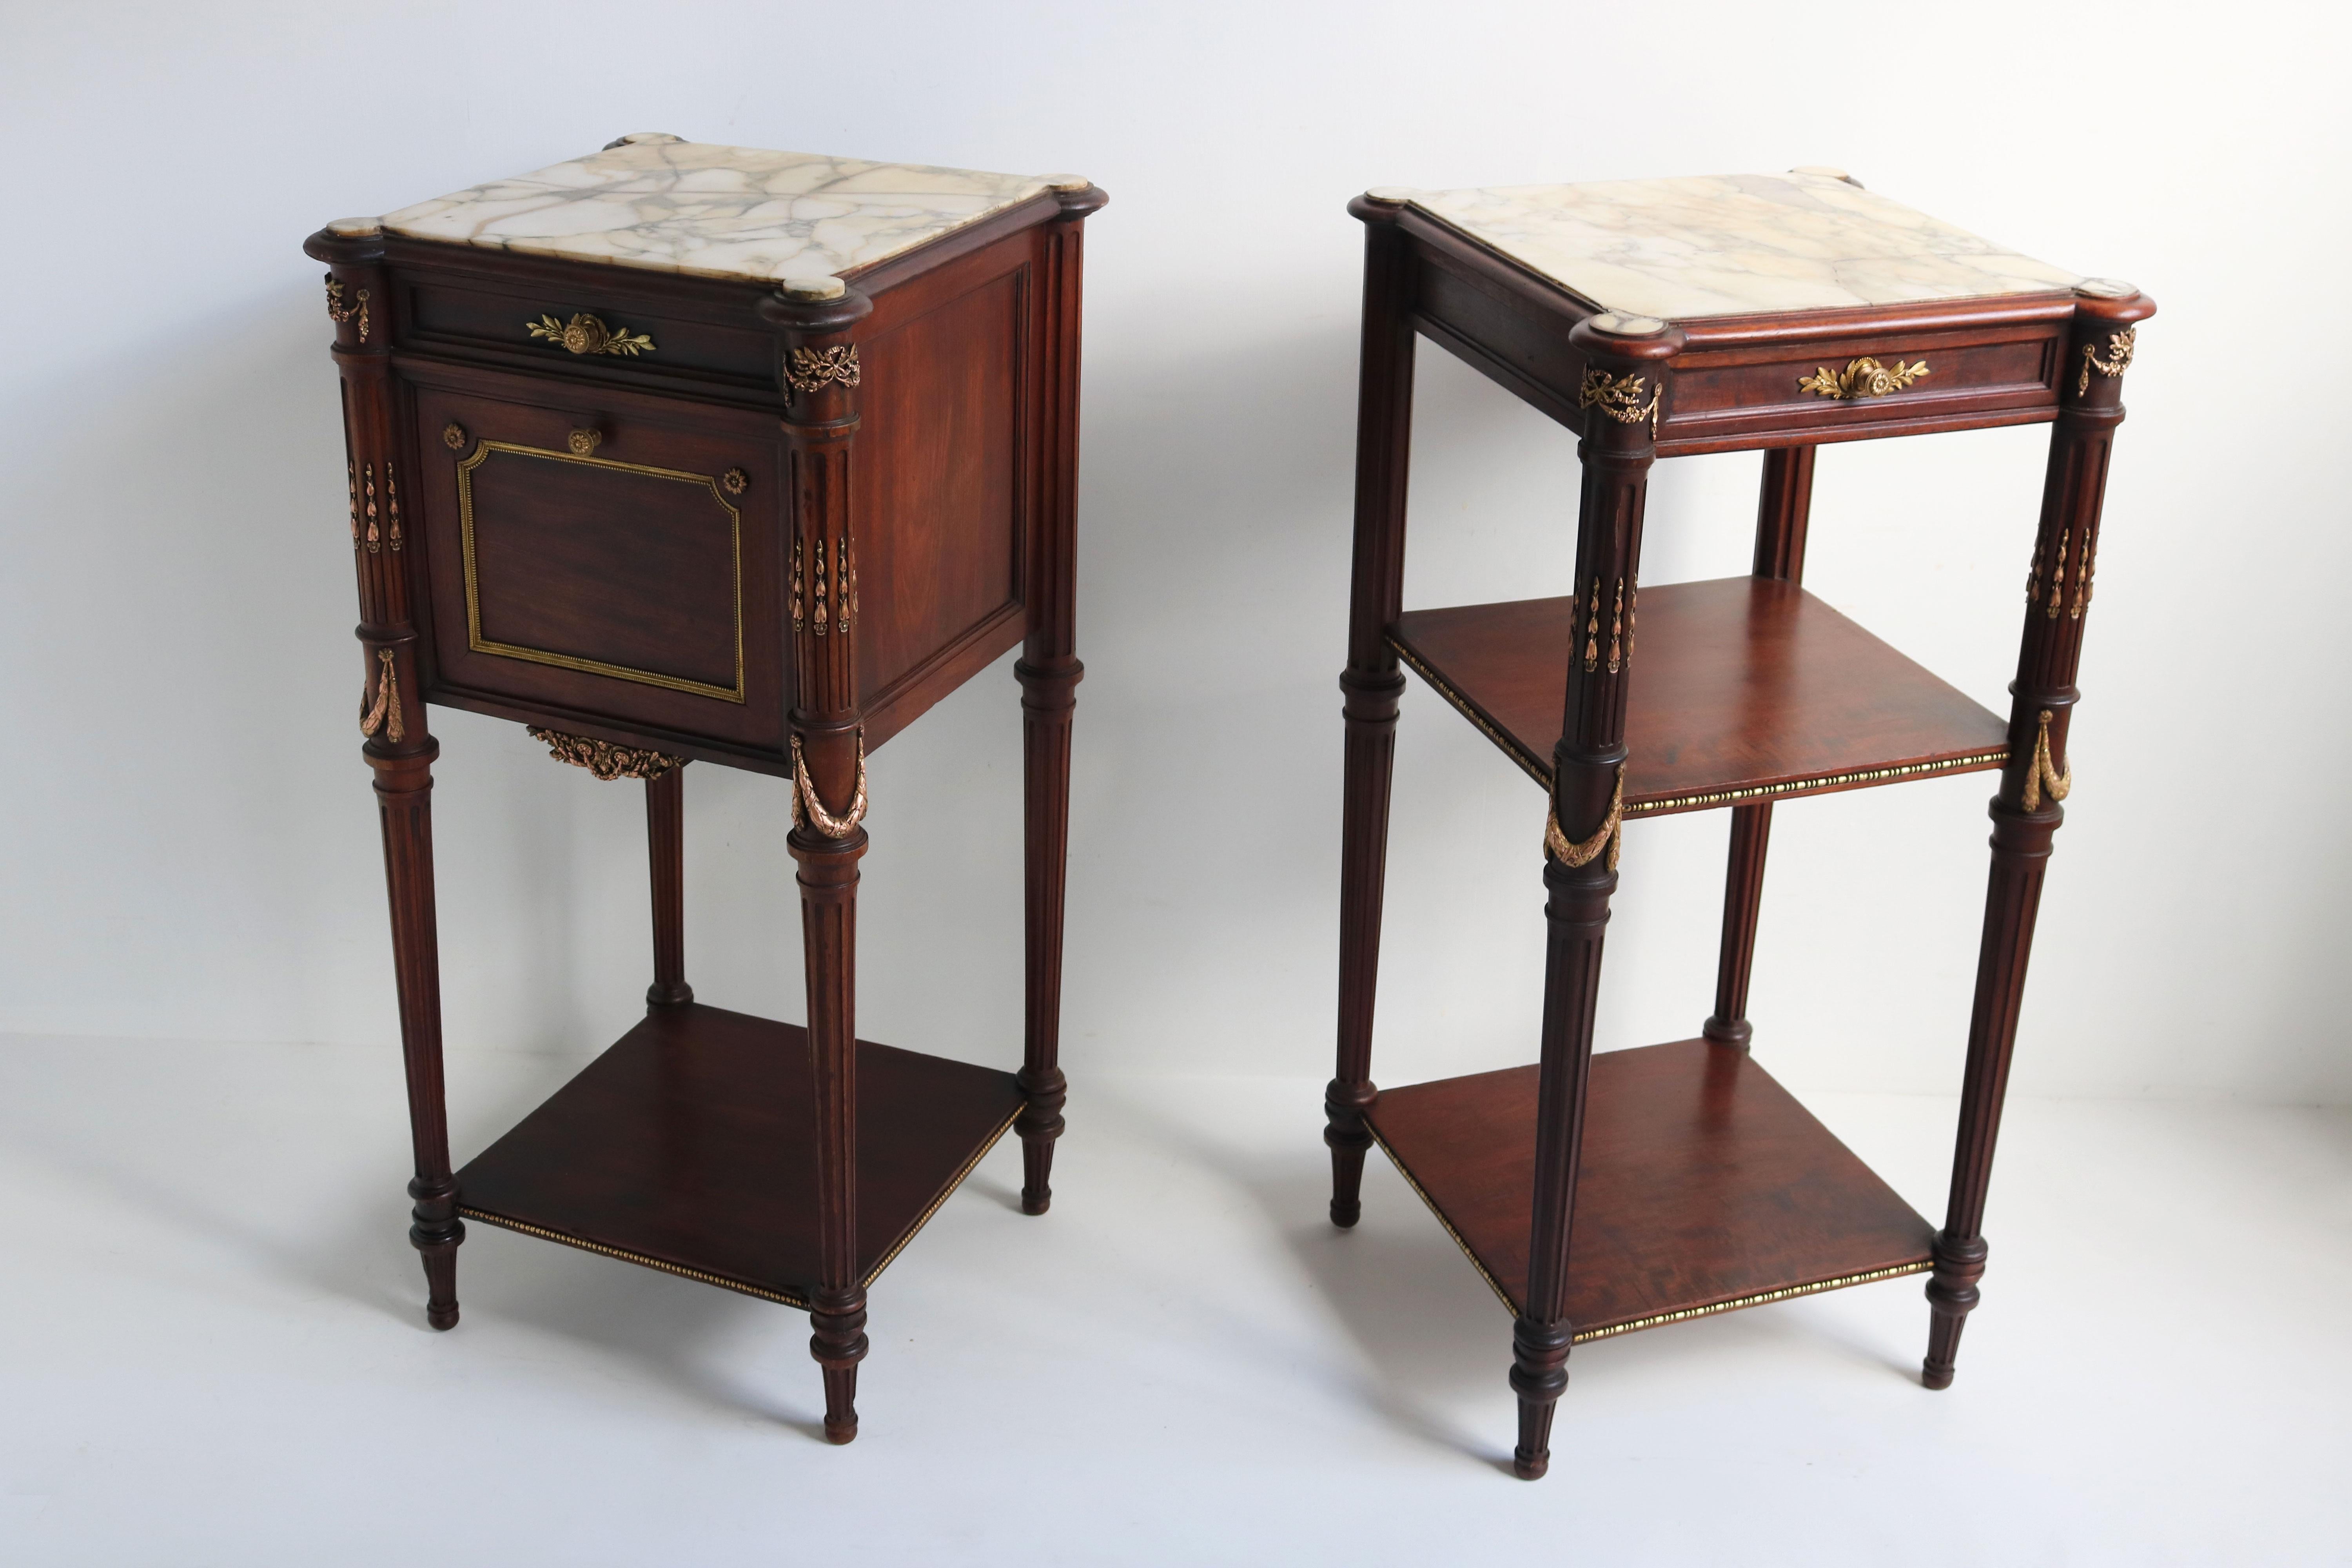 Exquisite pair of 19th century French Napoleon III night stands. Such a gorgeous & luxurious asymmetrical couple !
Made out of Mahogany and decorated with gilded bronze ornaments , minor carved details & uniquely shaped marble tops. 
One night